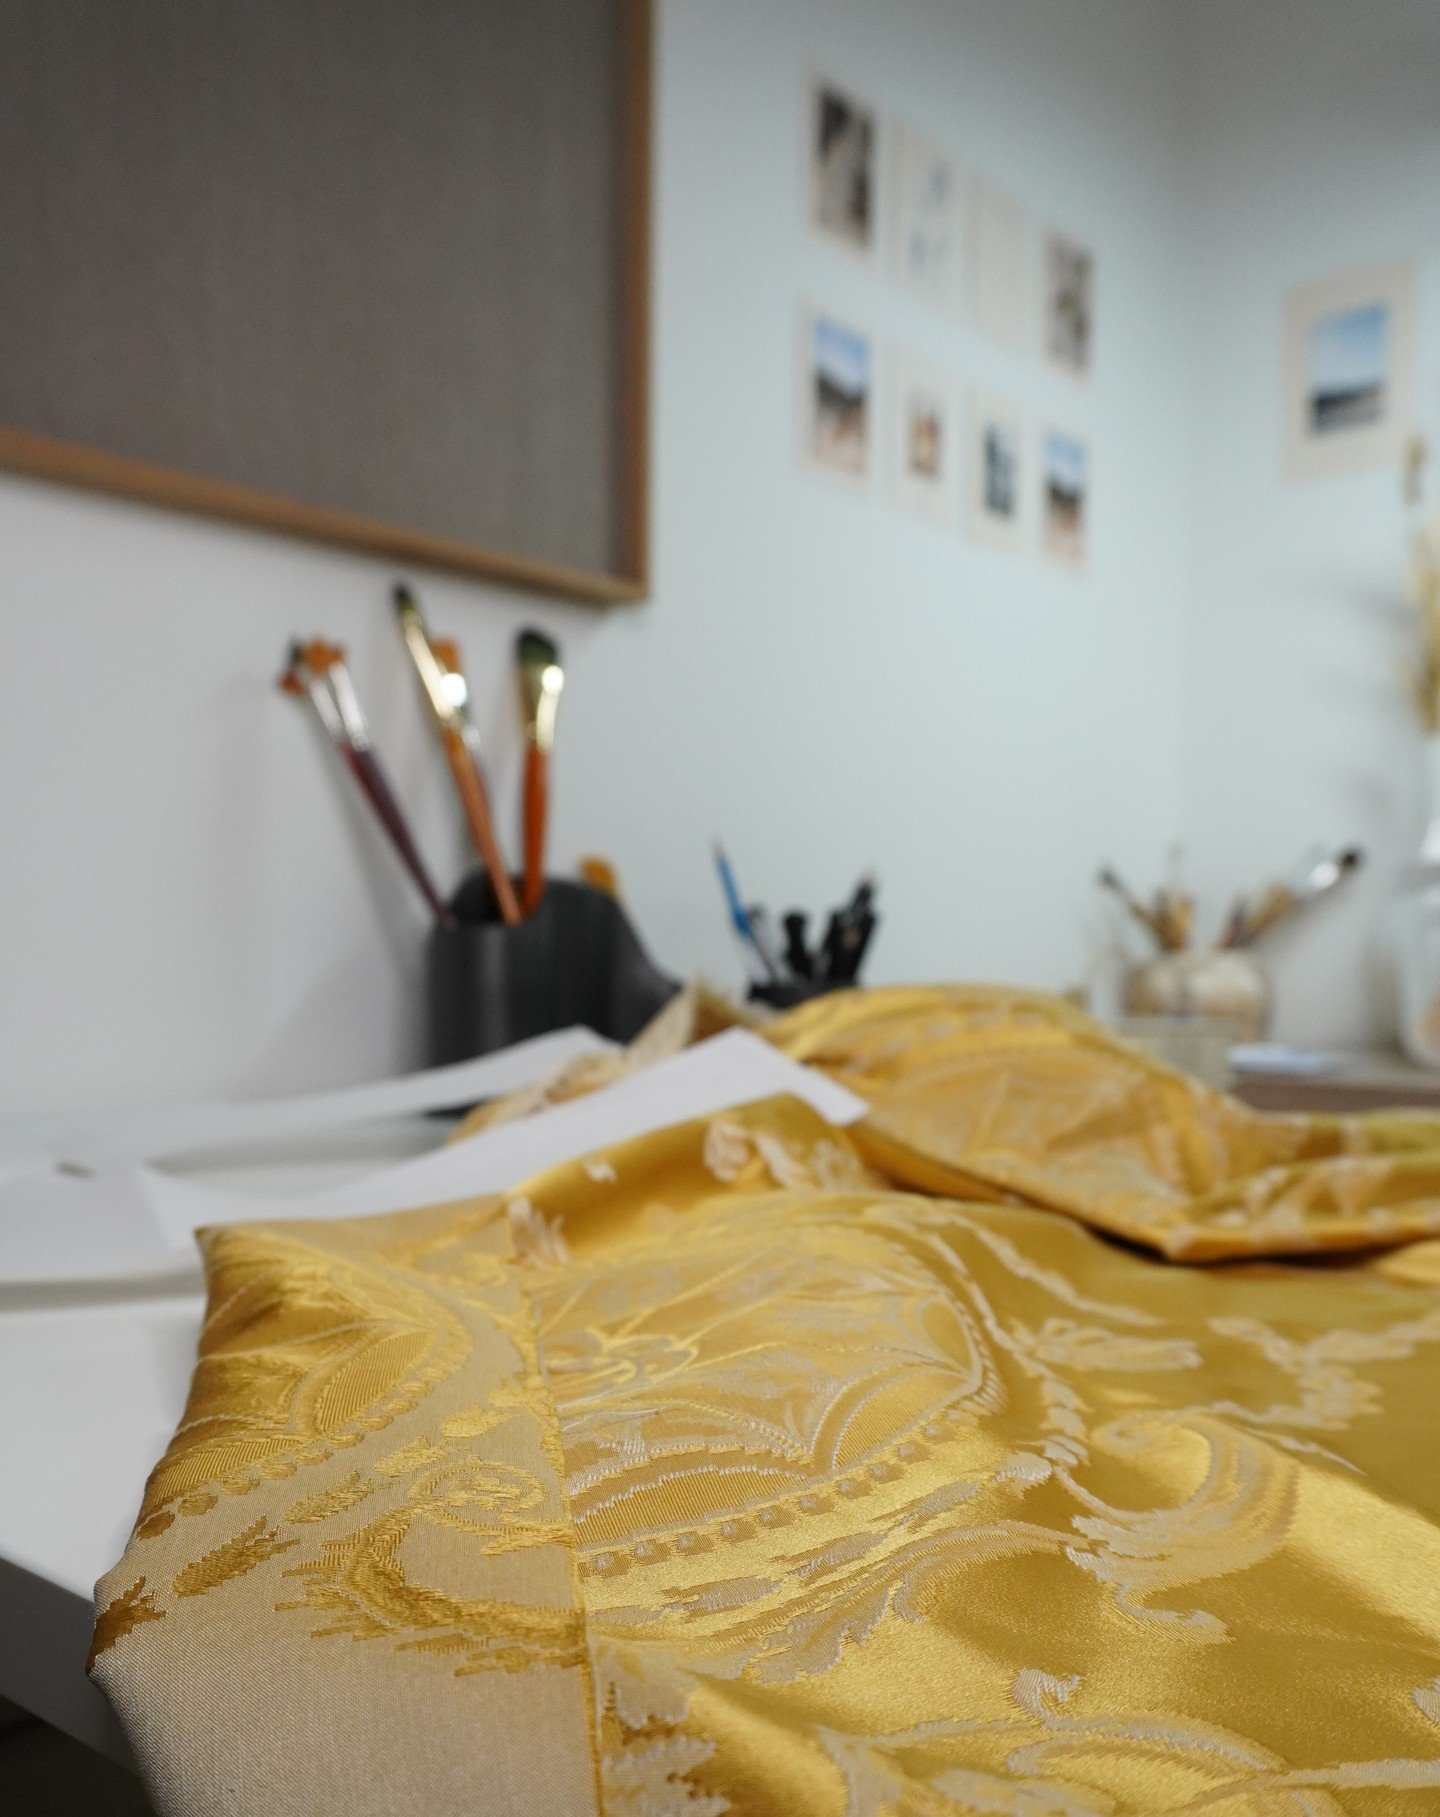 Behind the scenes at our Atelier ✂
&bull;
&bull;
&bull;
&bull;
#picoftheday #instagood #love #photography #instadaily #vscocam #instamoment #latergram #sewing #satin #sewingproject #moda #igers #likeforlikes #hautecouture #textileindustry #handcrafte